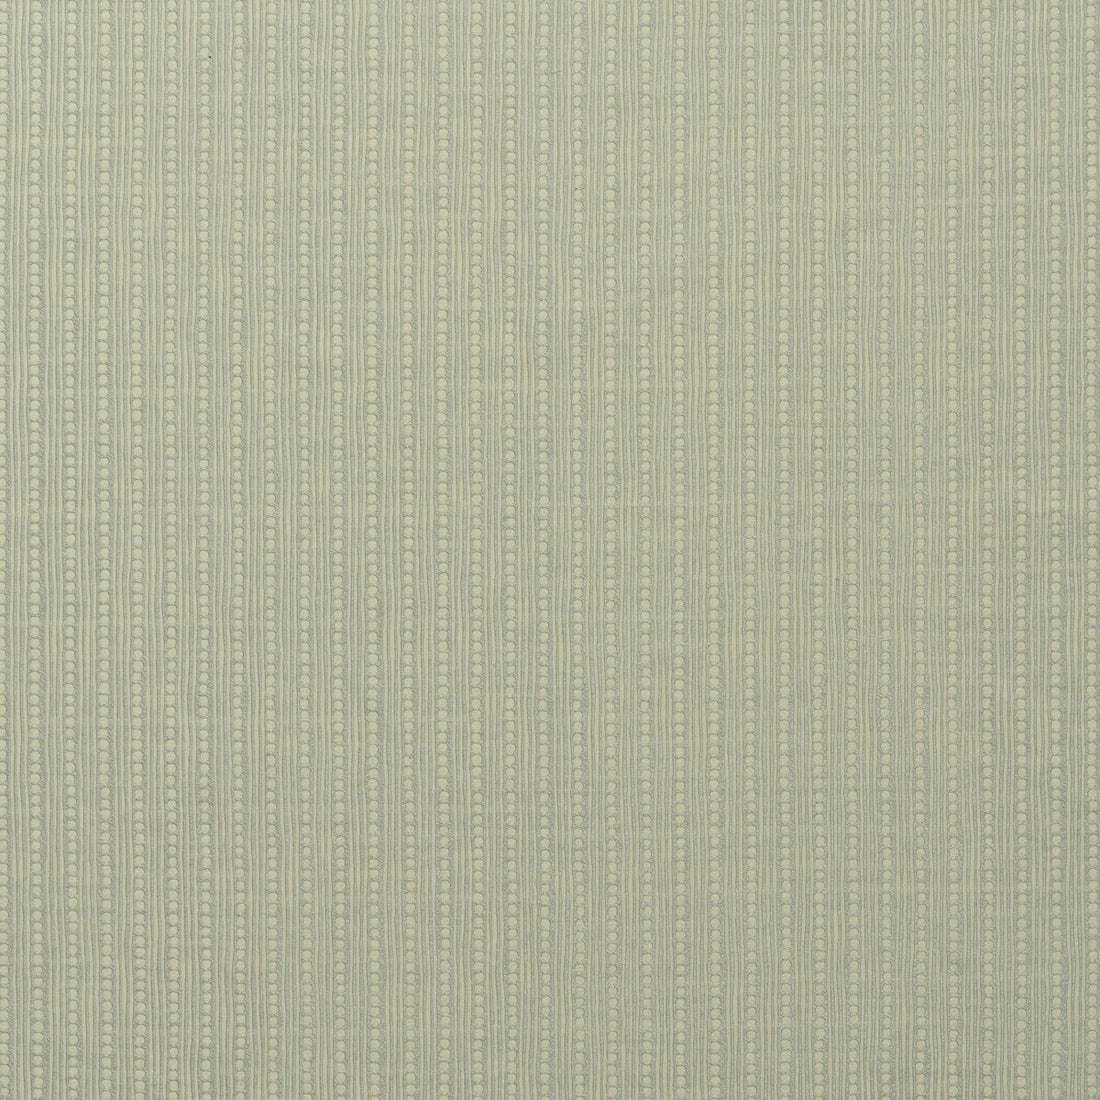 Wickham fabric in mist color - pattern BFC-3678.11.0 - by Lee Jofa in the Blithfield collection